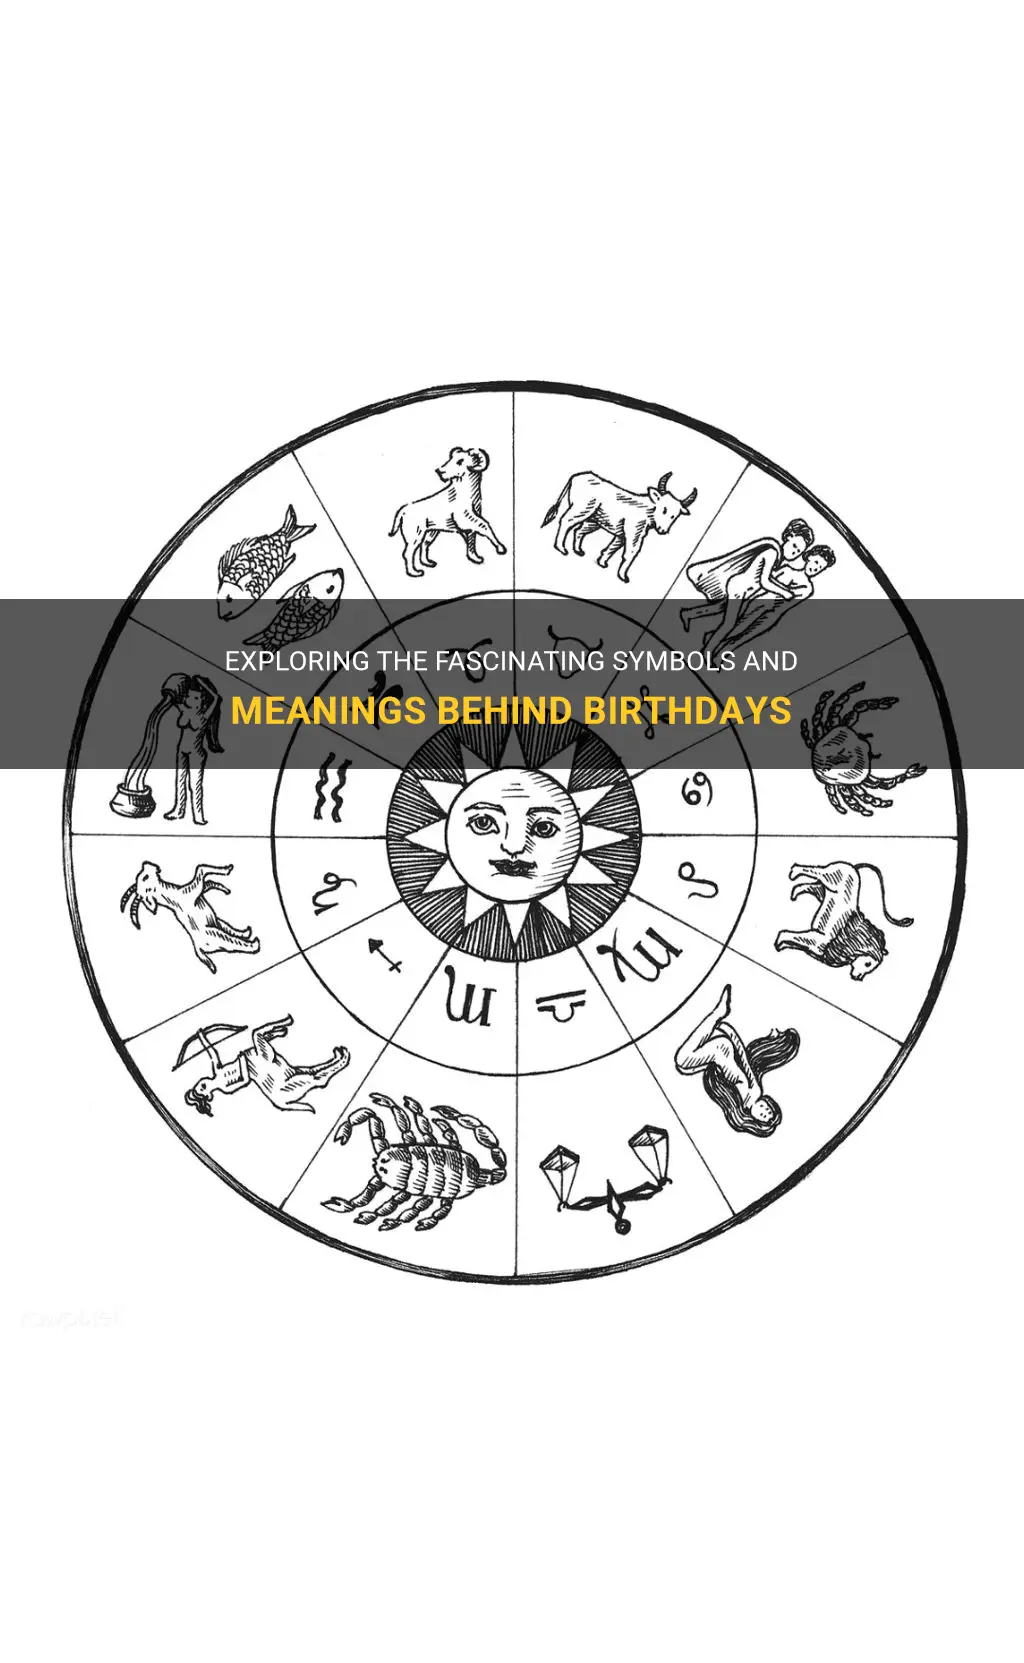 birthday symbols and meanings